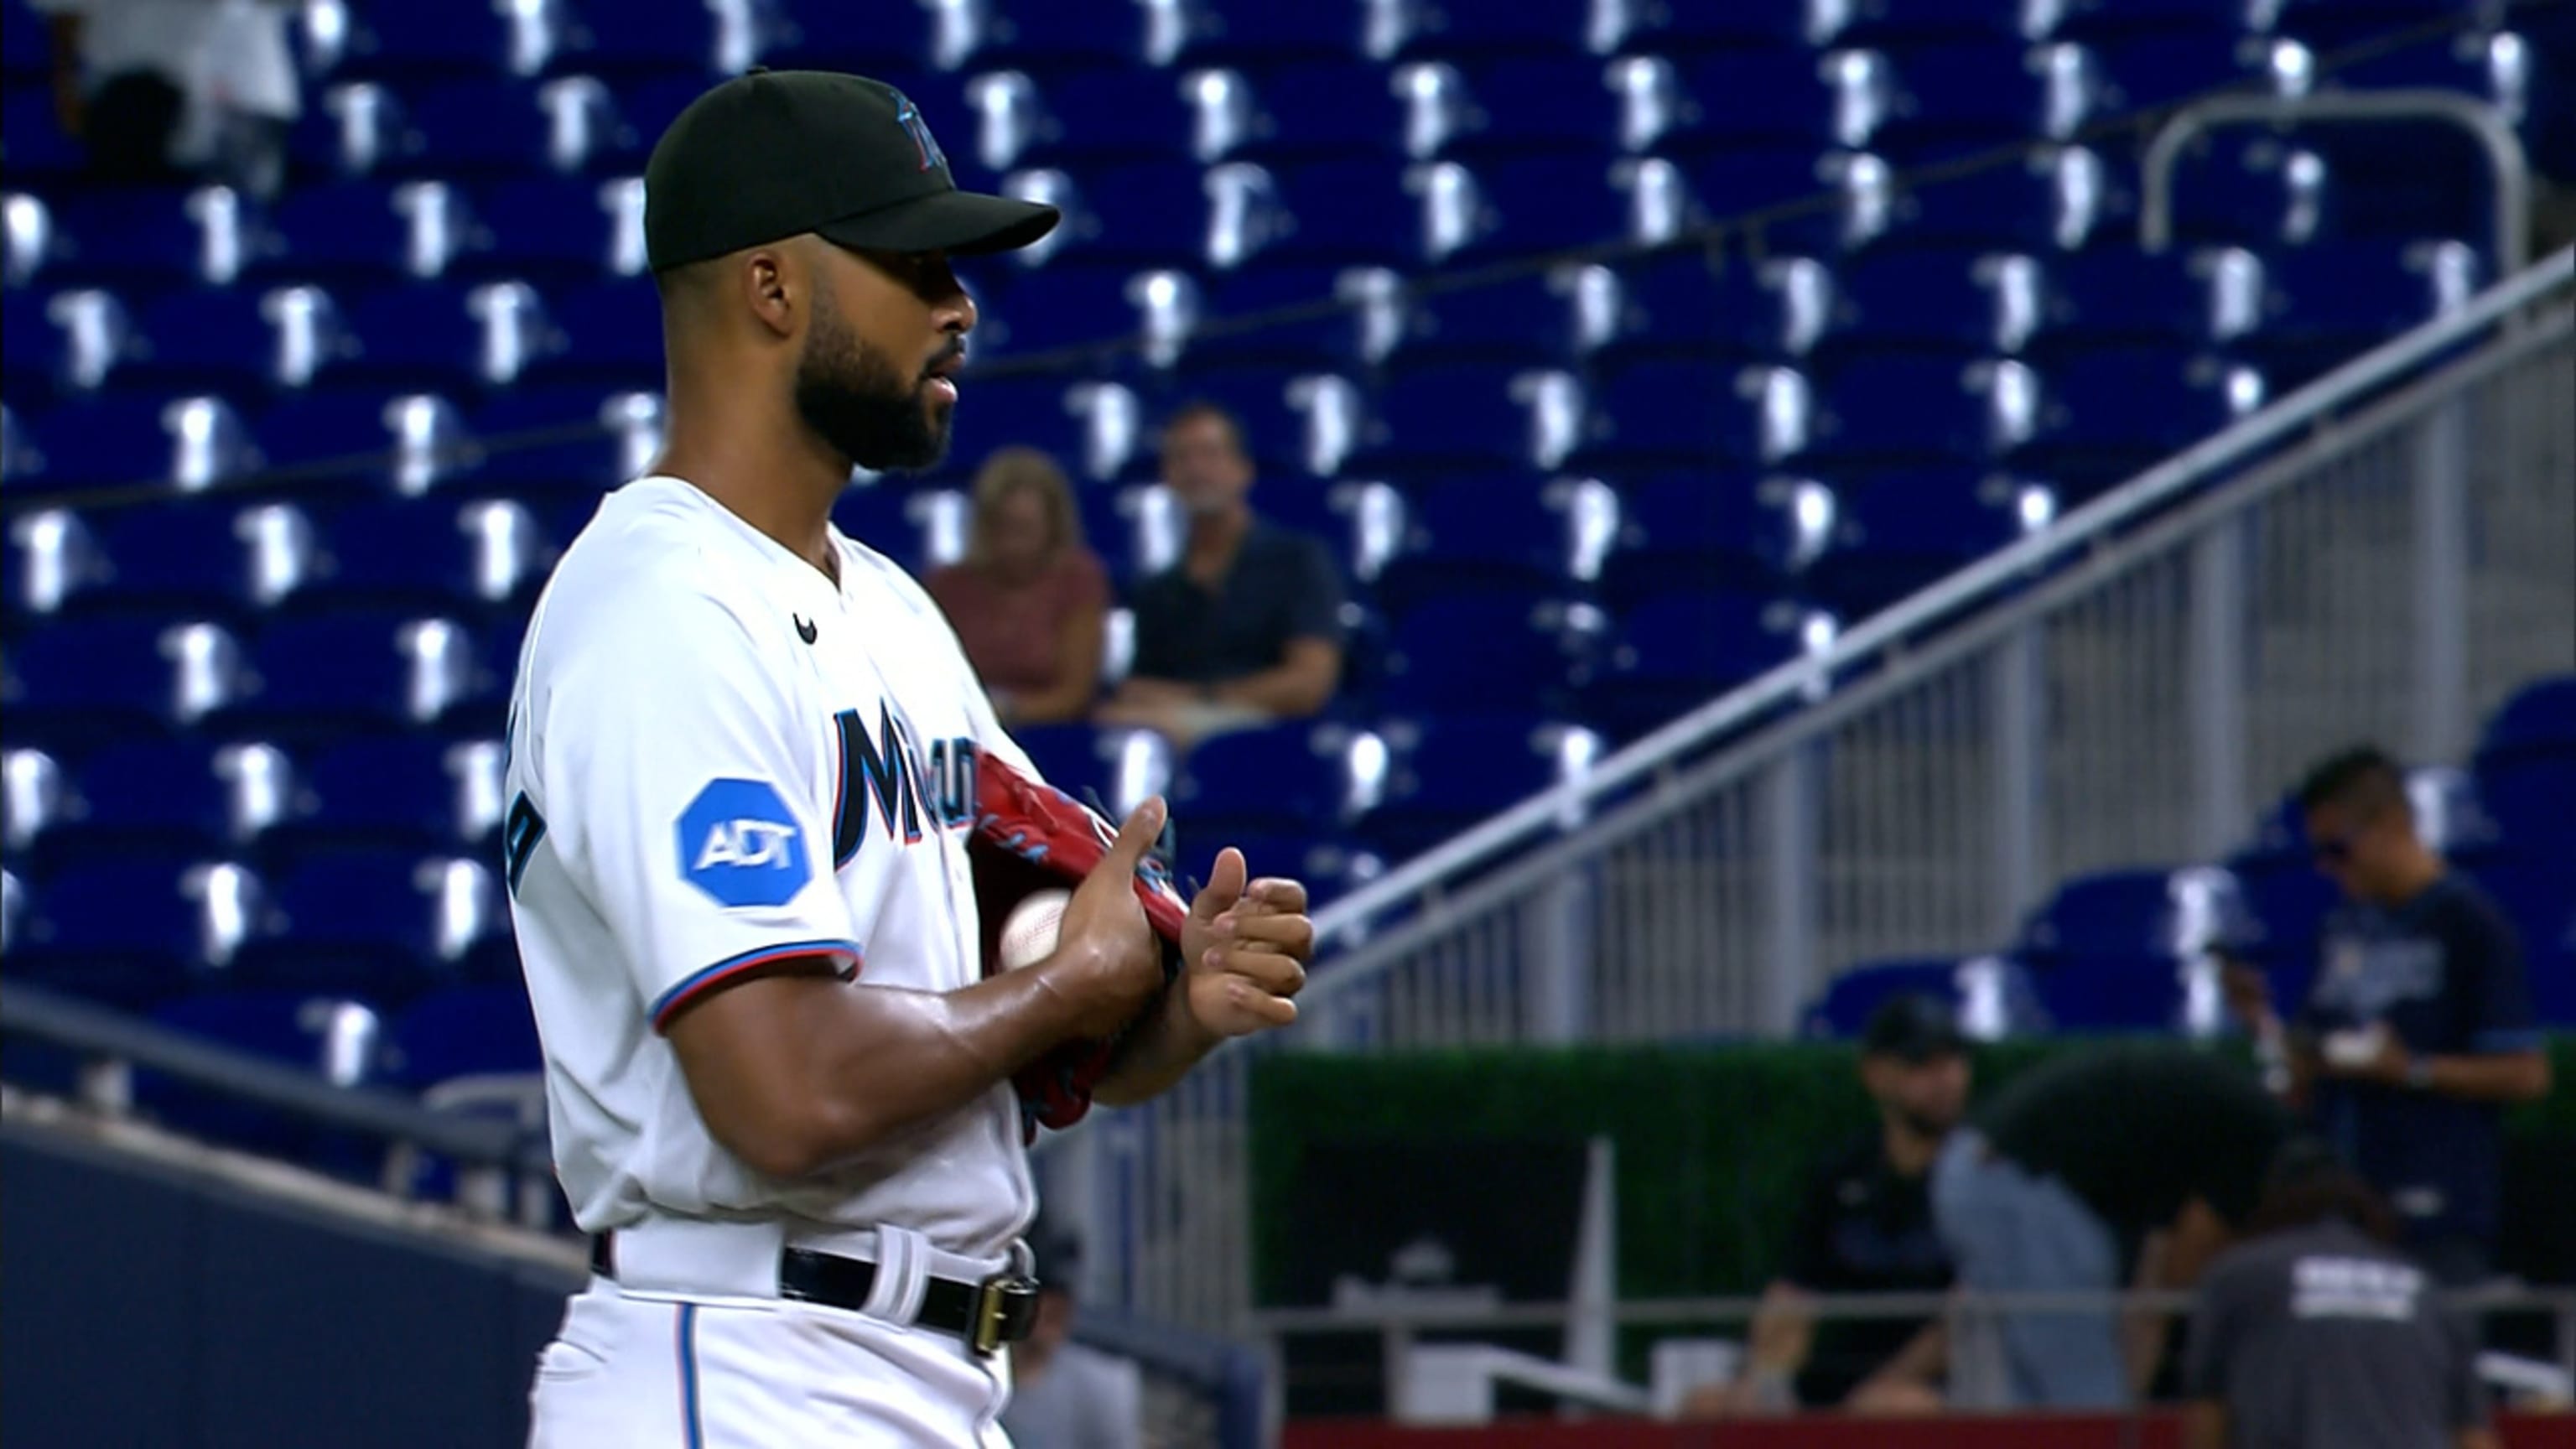 Miami Marlins full 2022 schedule released